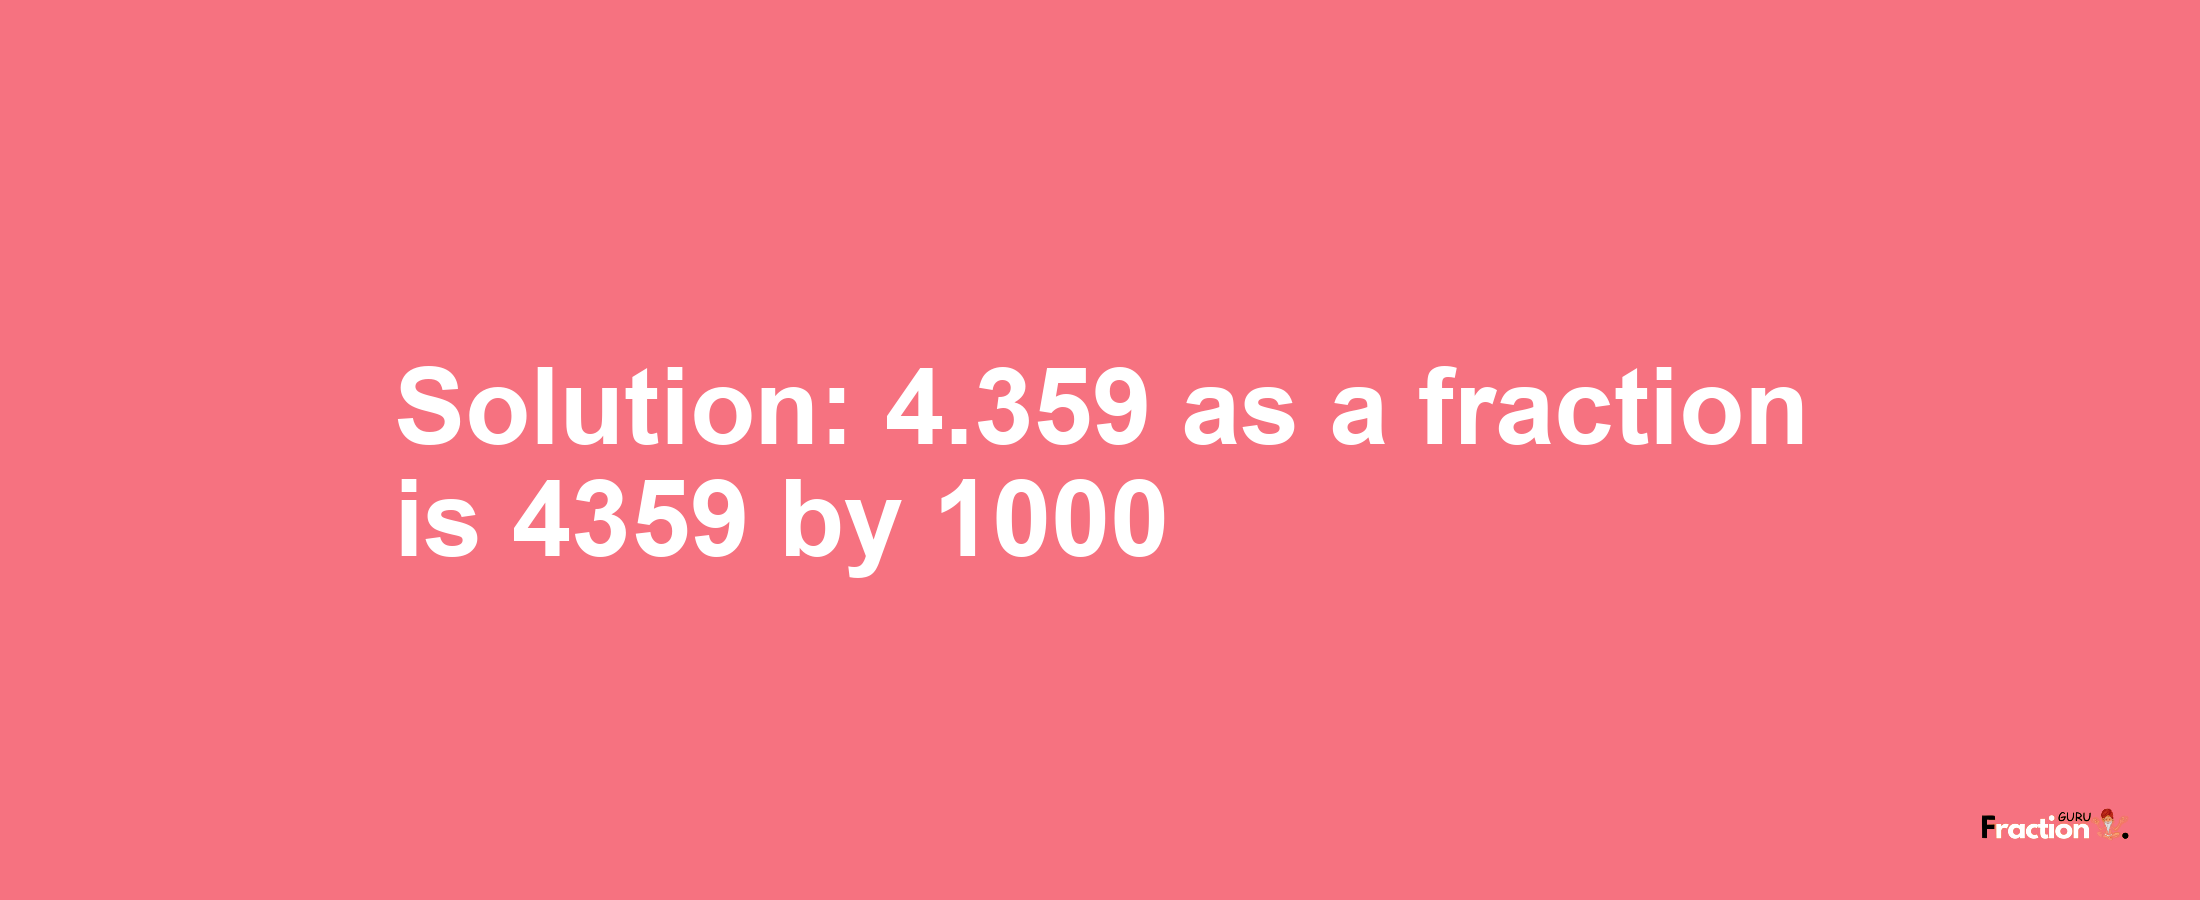 Solution:4.359 as a fraction is 4359/1000